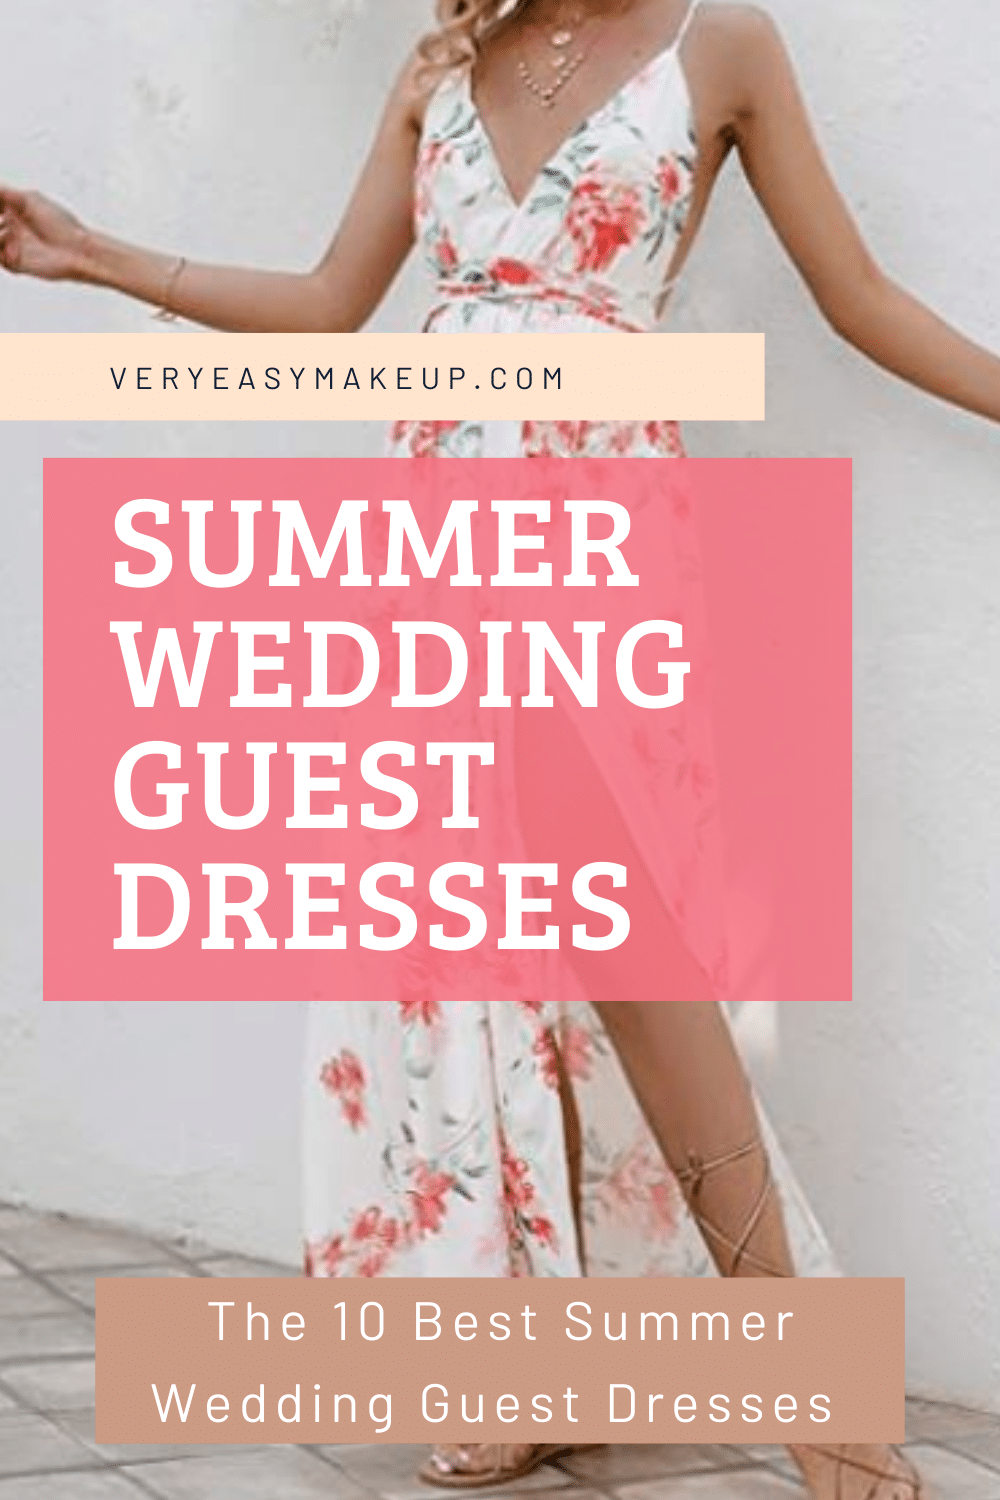 The 10 Best Summer Wedding Guest Dresses on Amazon 2021 by Very Easy Makeup